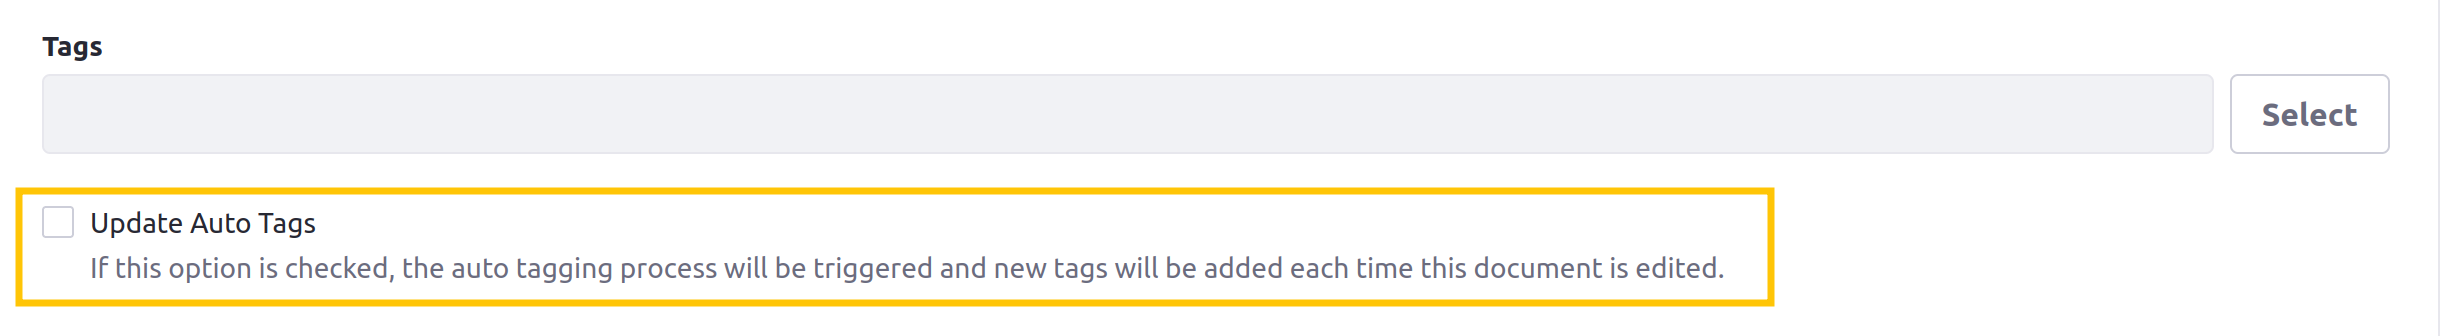 You can disable update auto tagging for individual content items if desired.